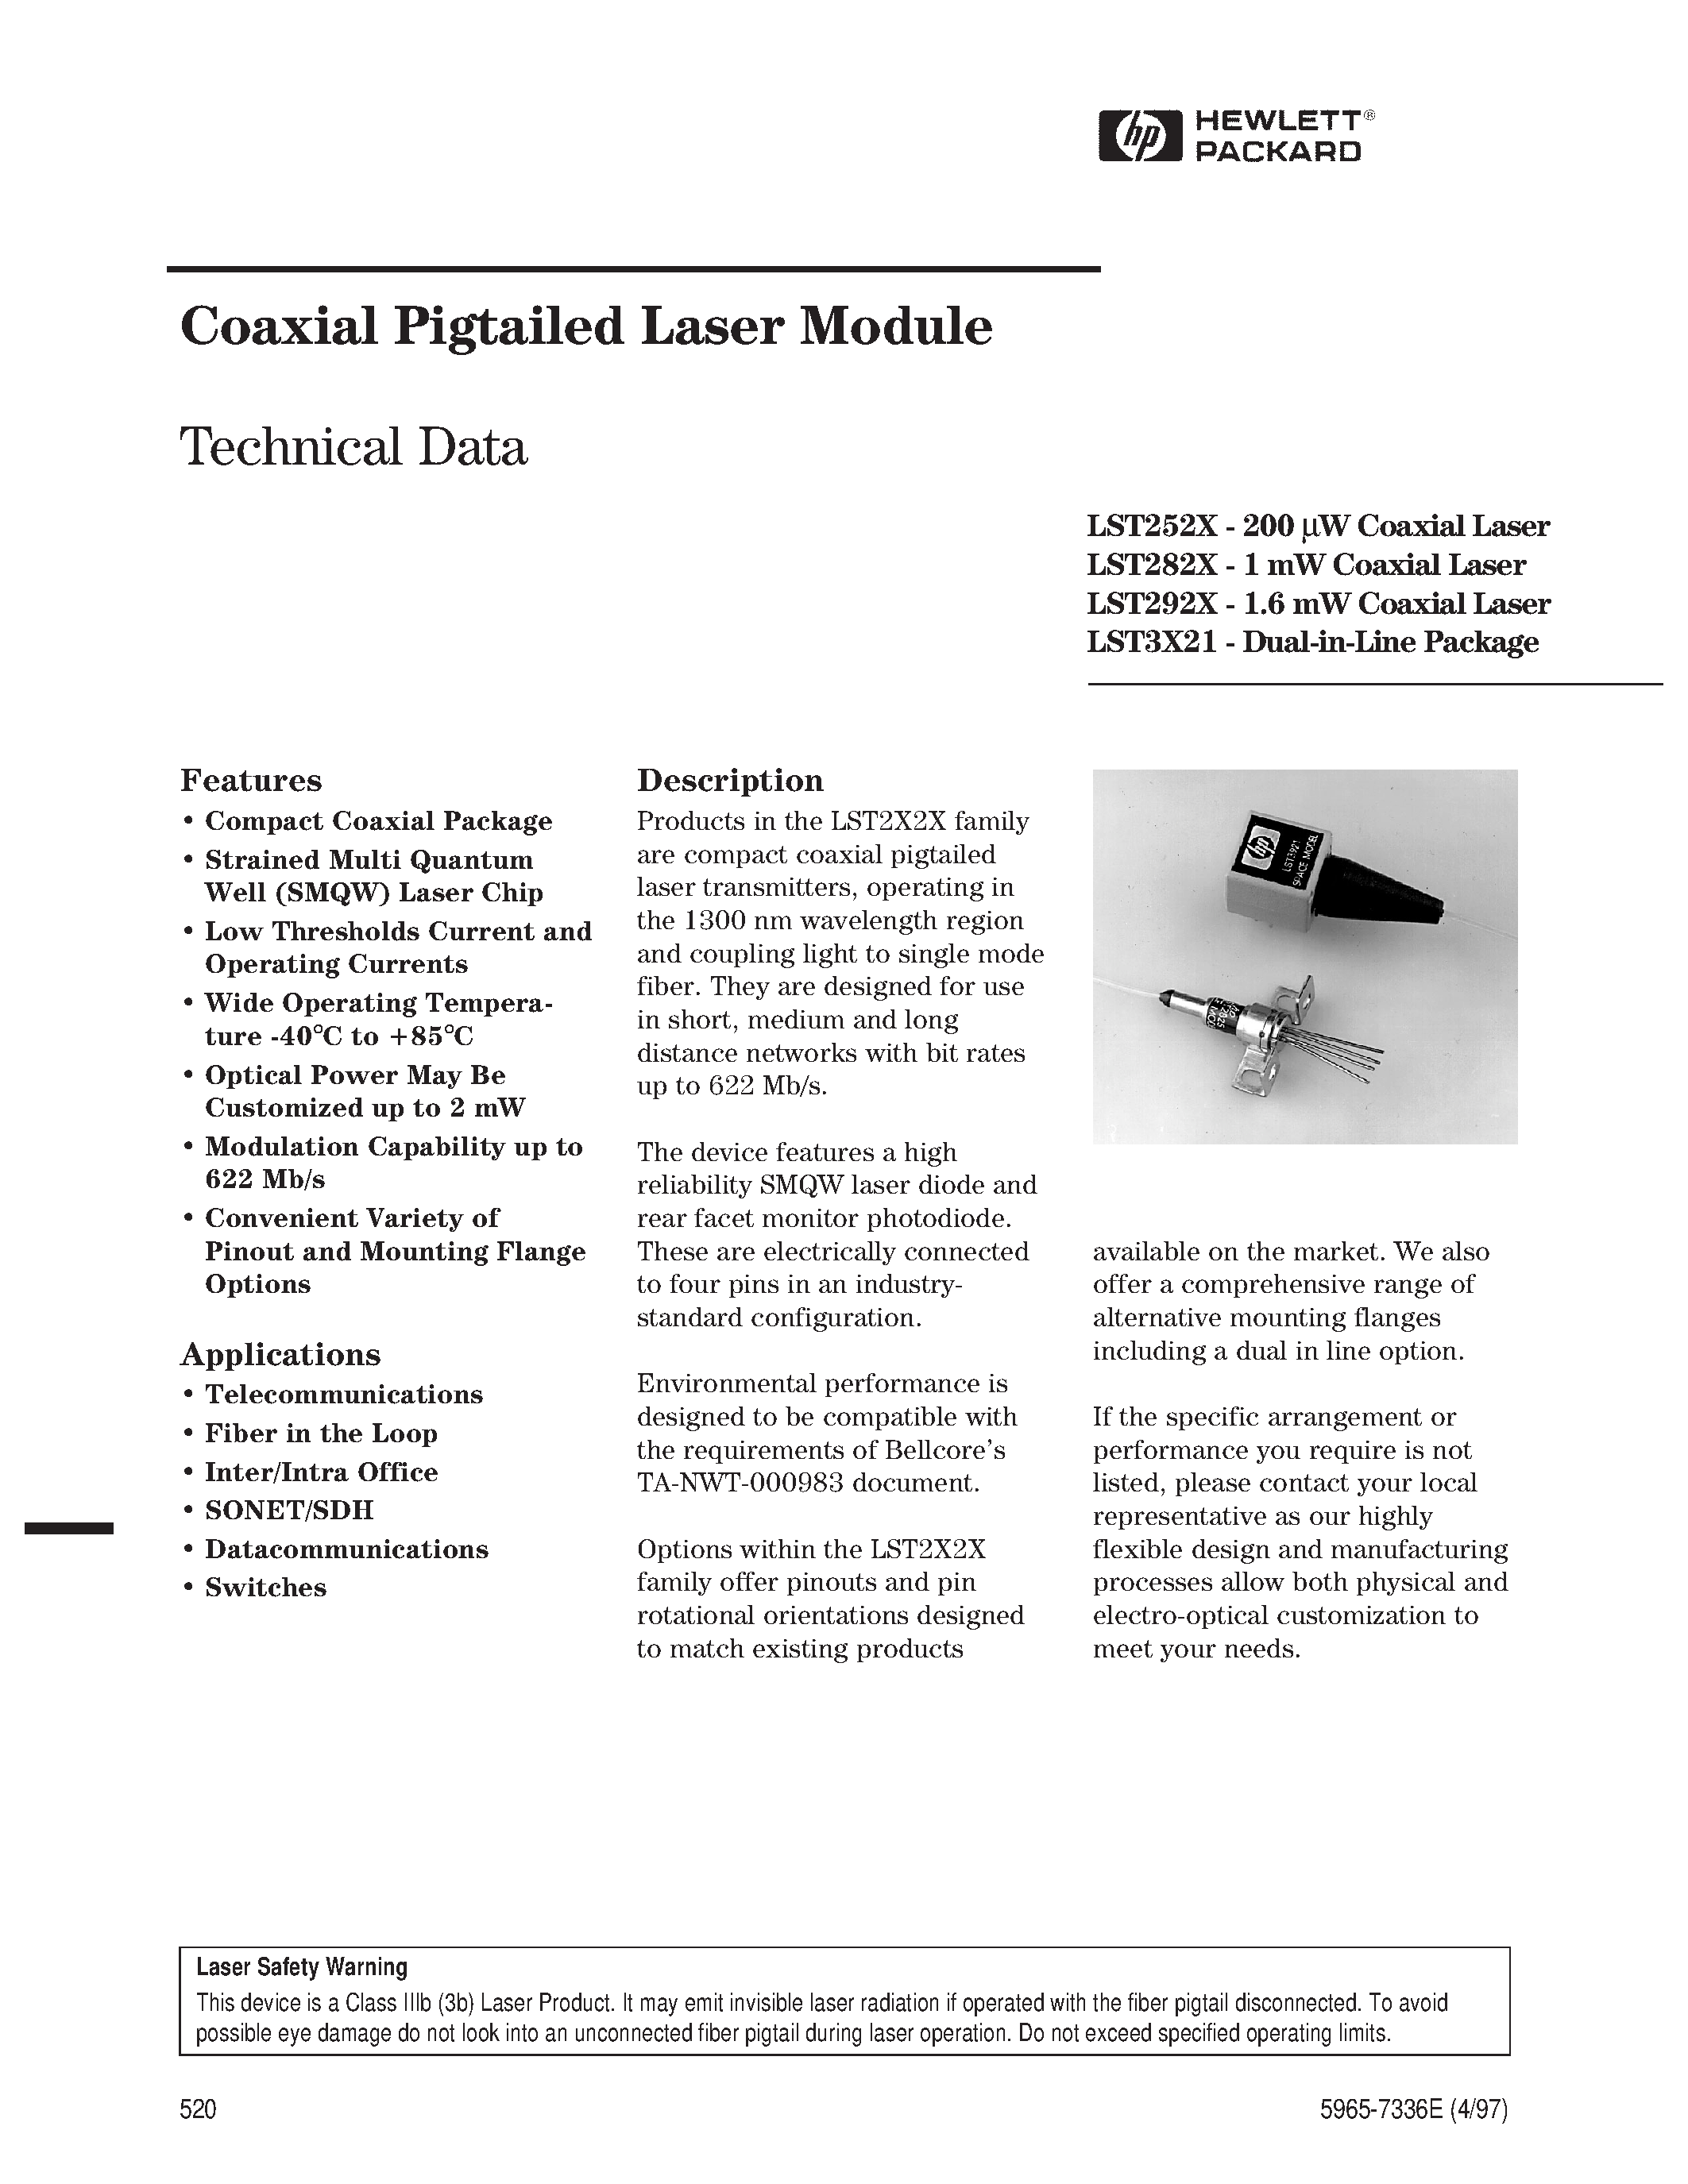 Даташит LST2425B-T-AP - Coaxial Pigtailed Laser Module страница 1